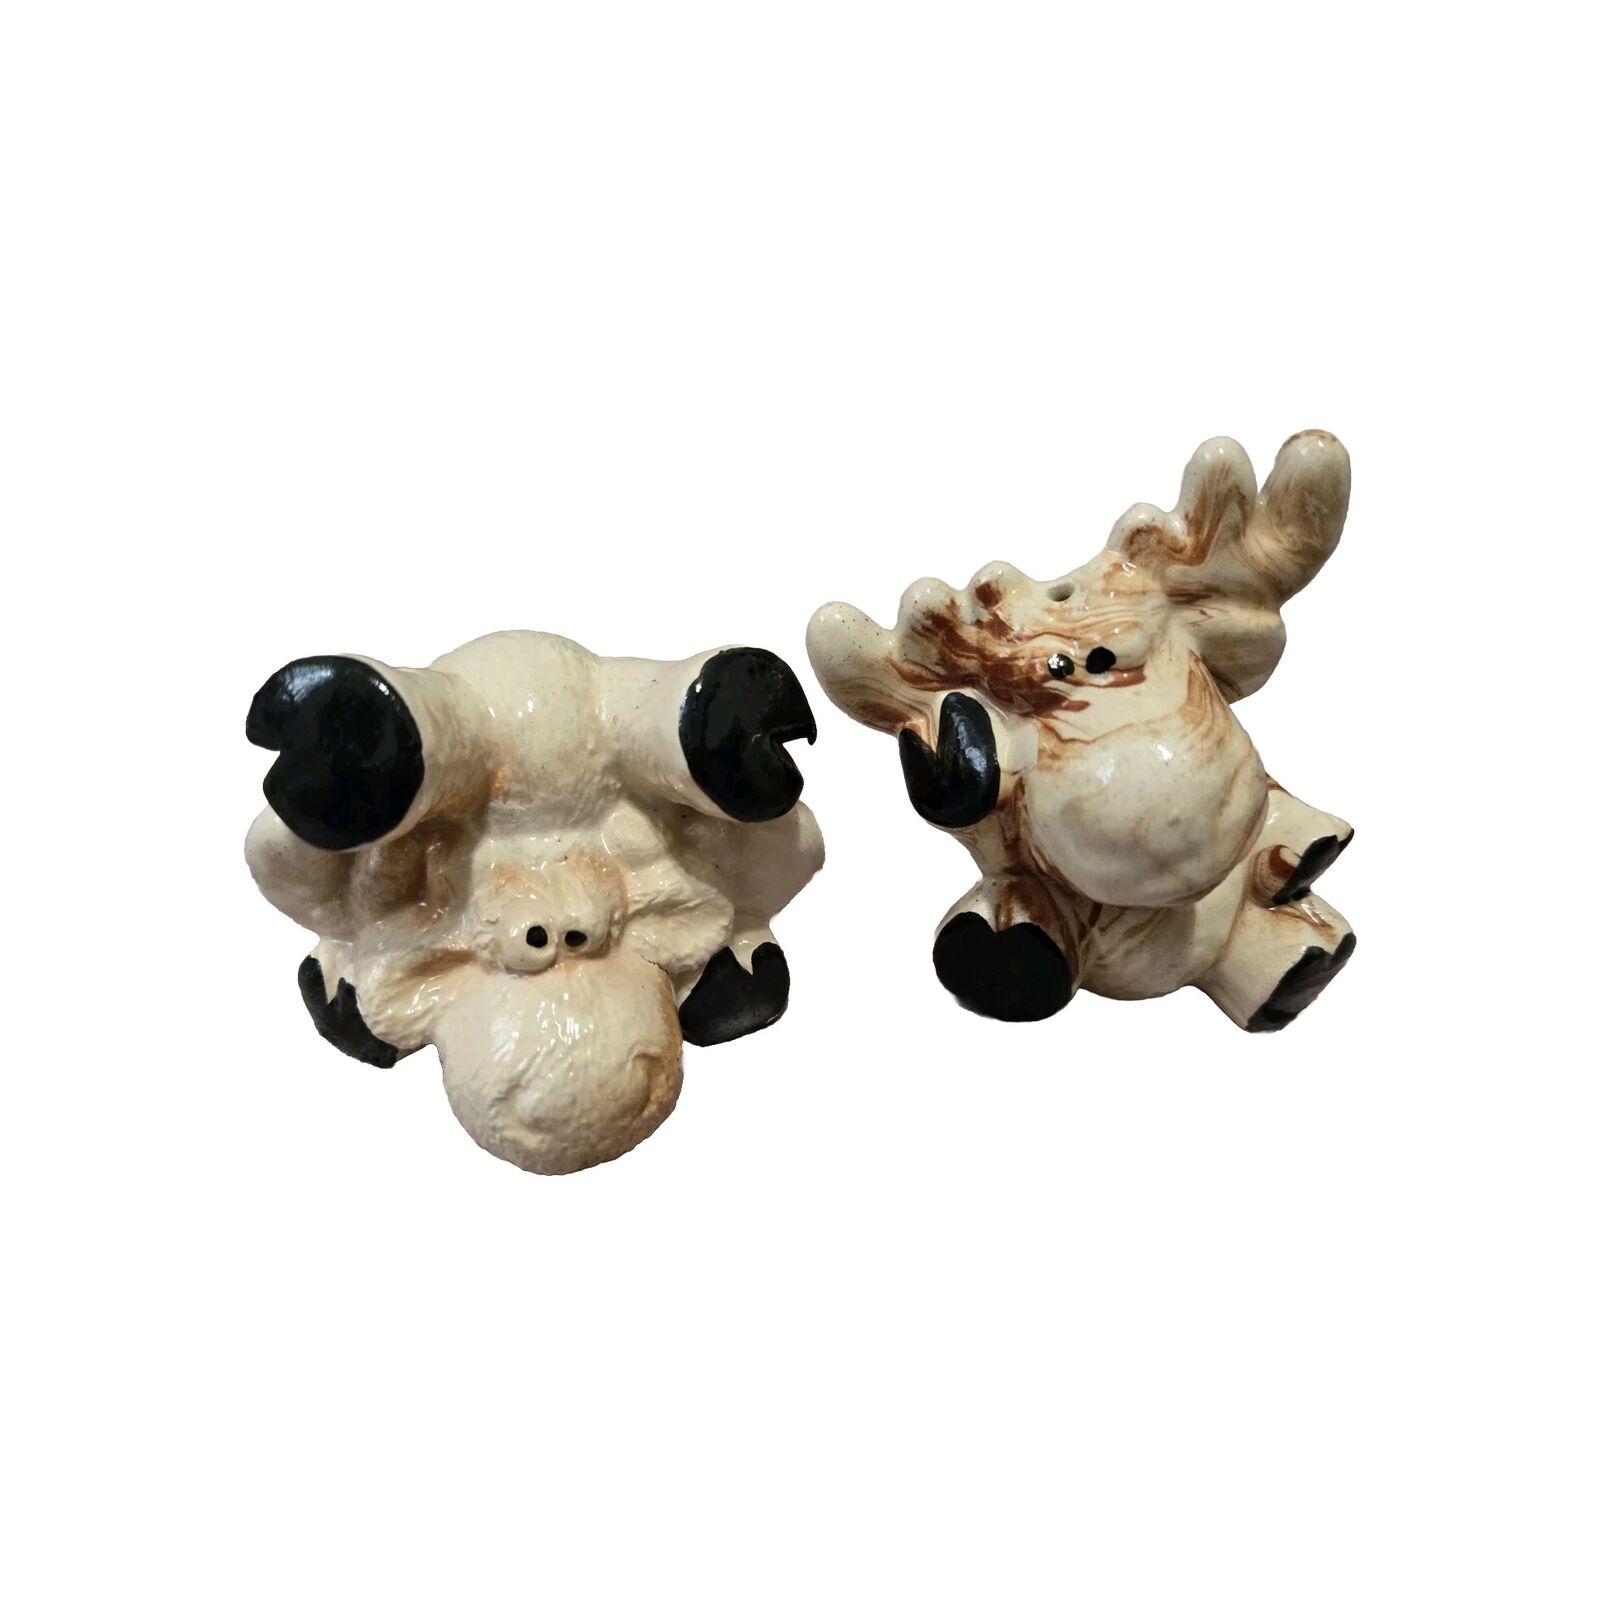 Moose Salt & Pepper Shakers Made In Alaska Clay Ceramic W/ Rubber Stoppers